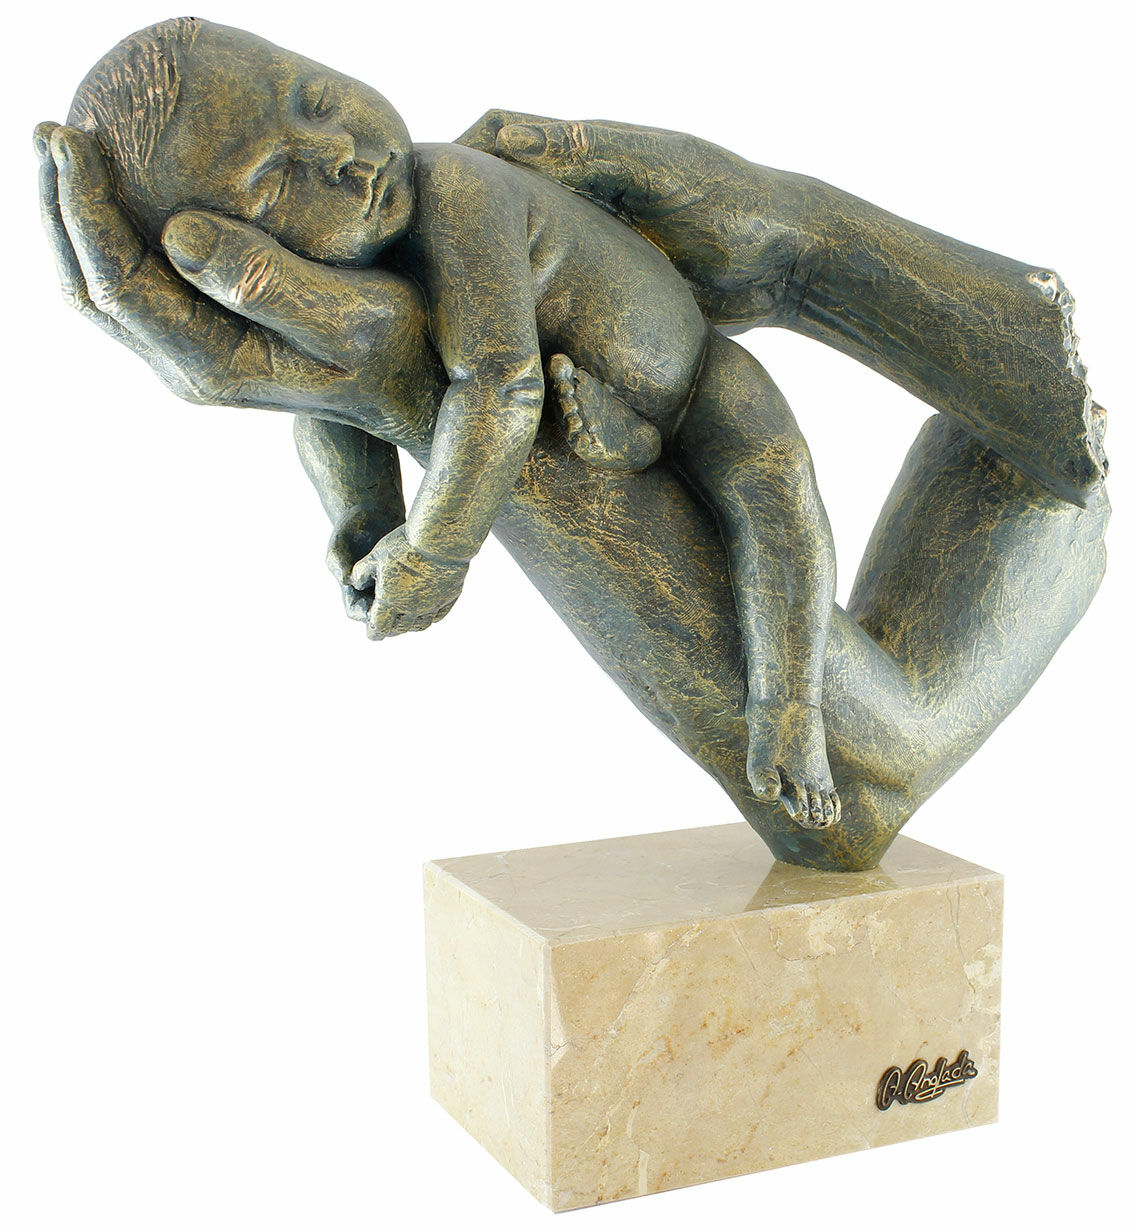 Sculpture "Mother and Child", artificial stone by Angeles Anglada